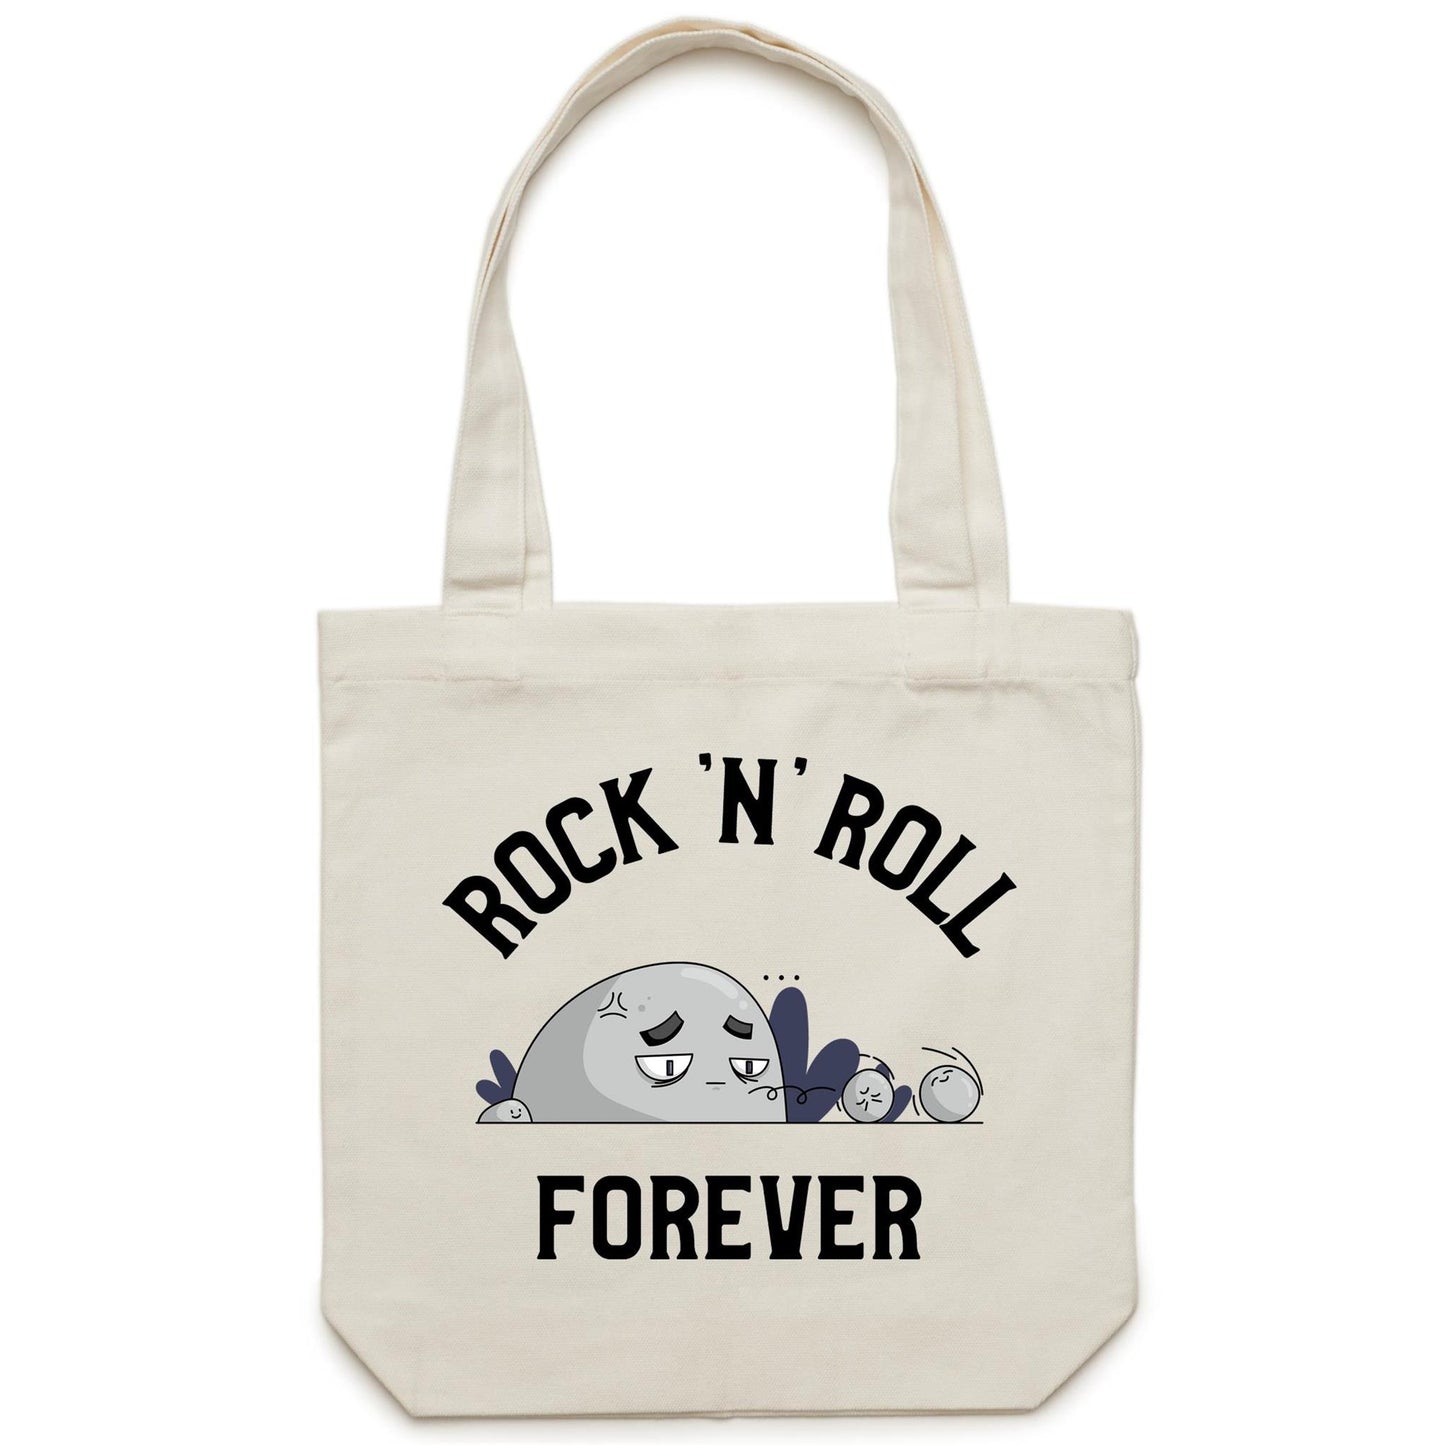 Rock 'N' Roll Forever - Canvas Tote Bag Cream One Size Tote Bag Music